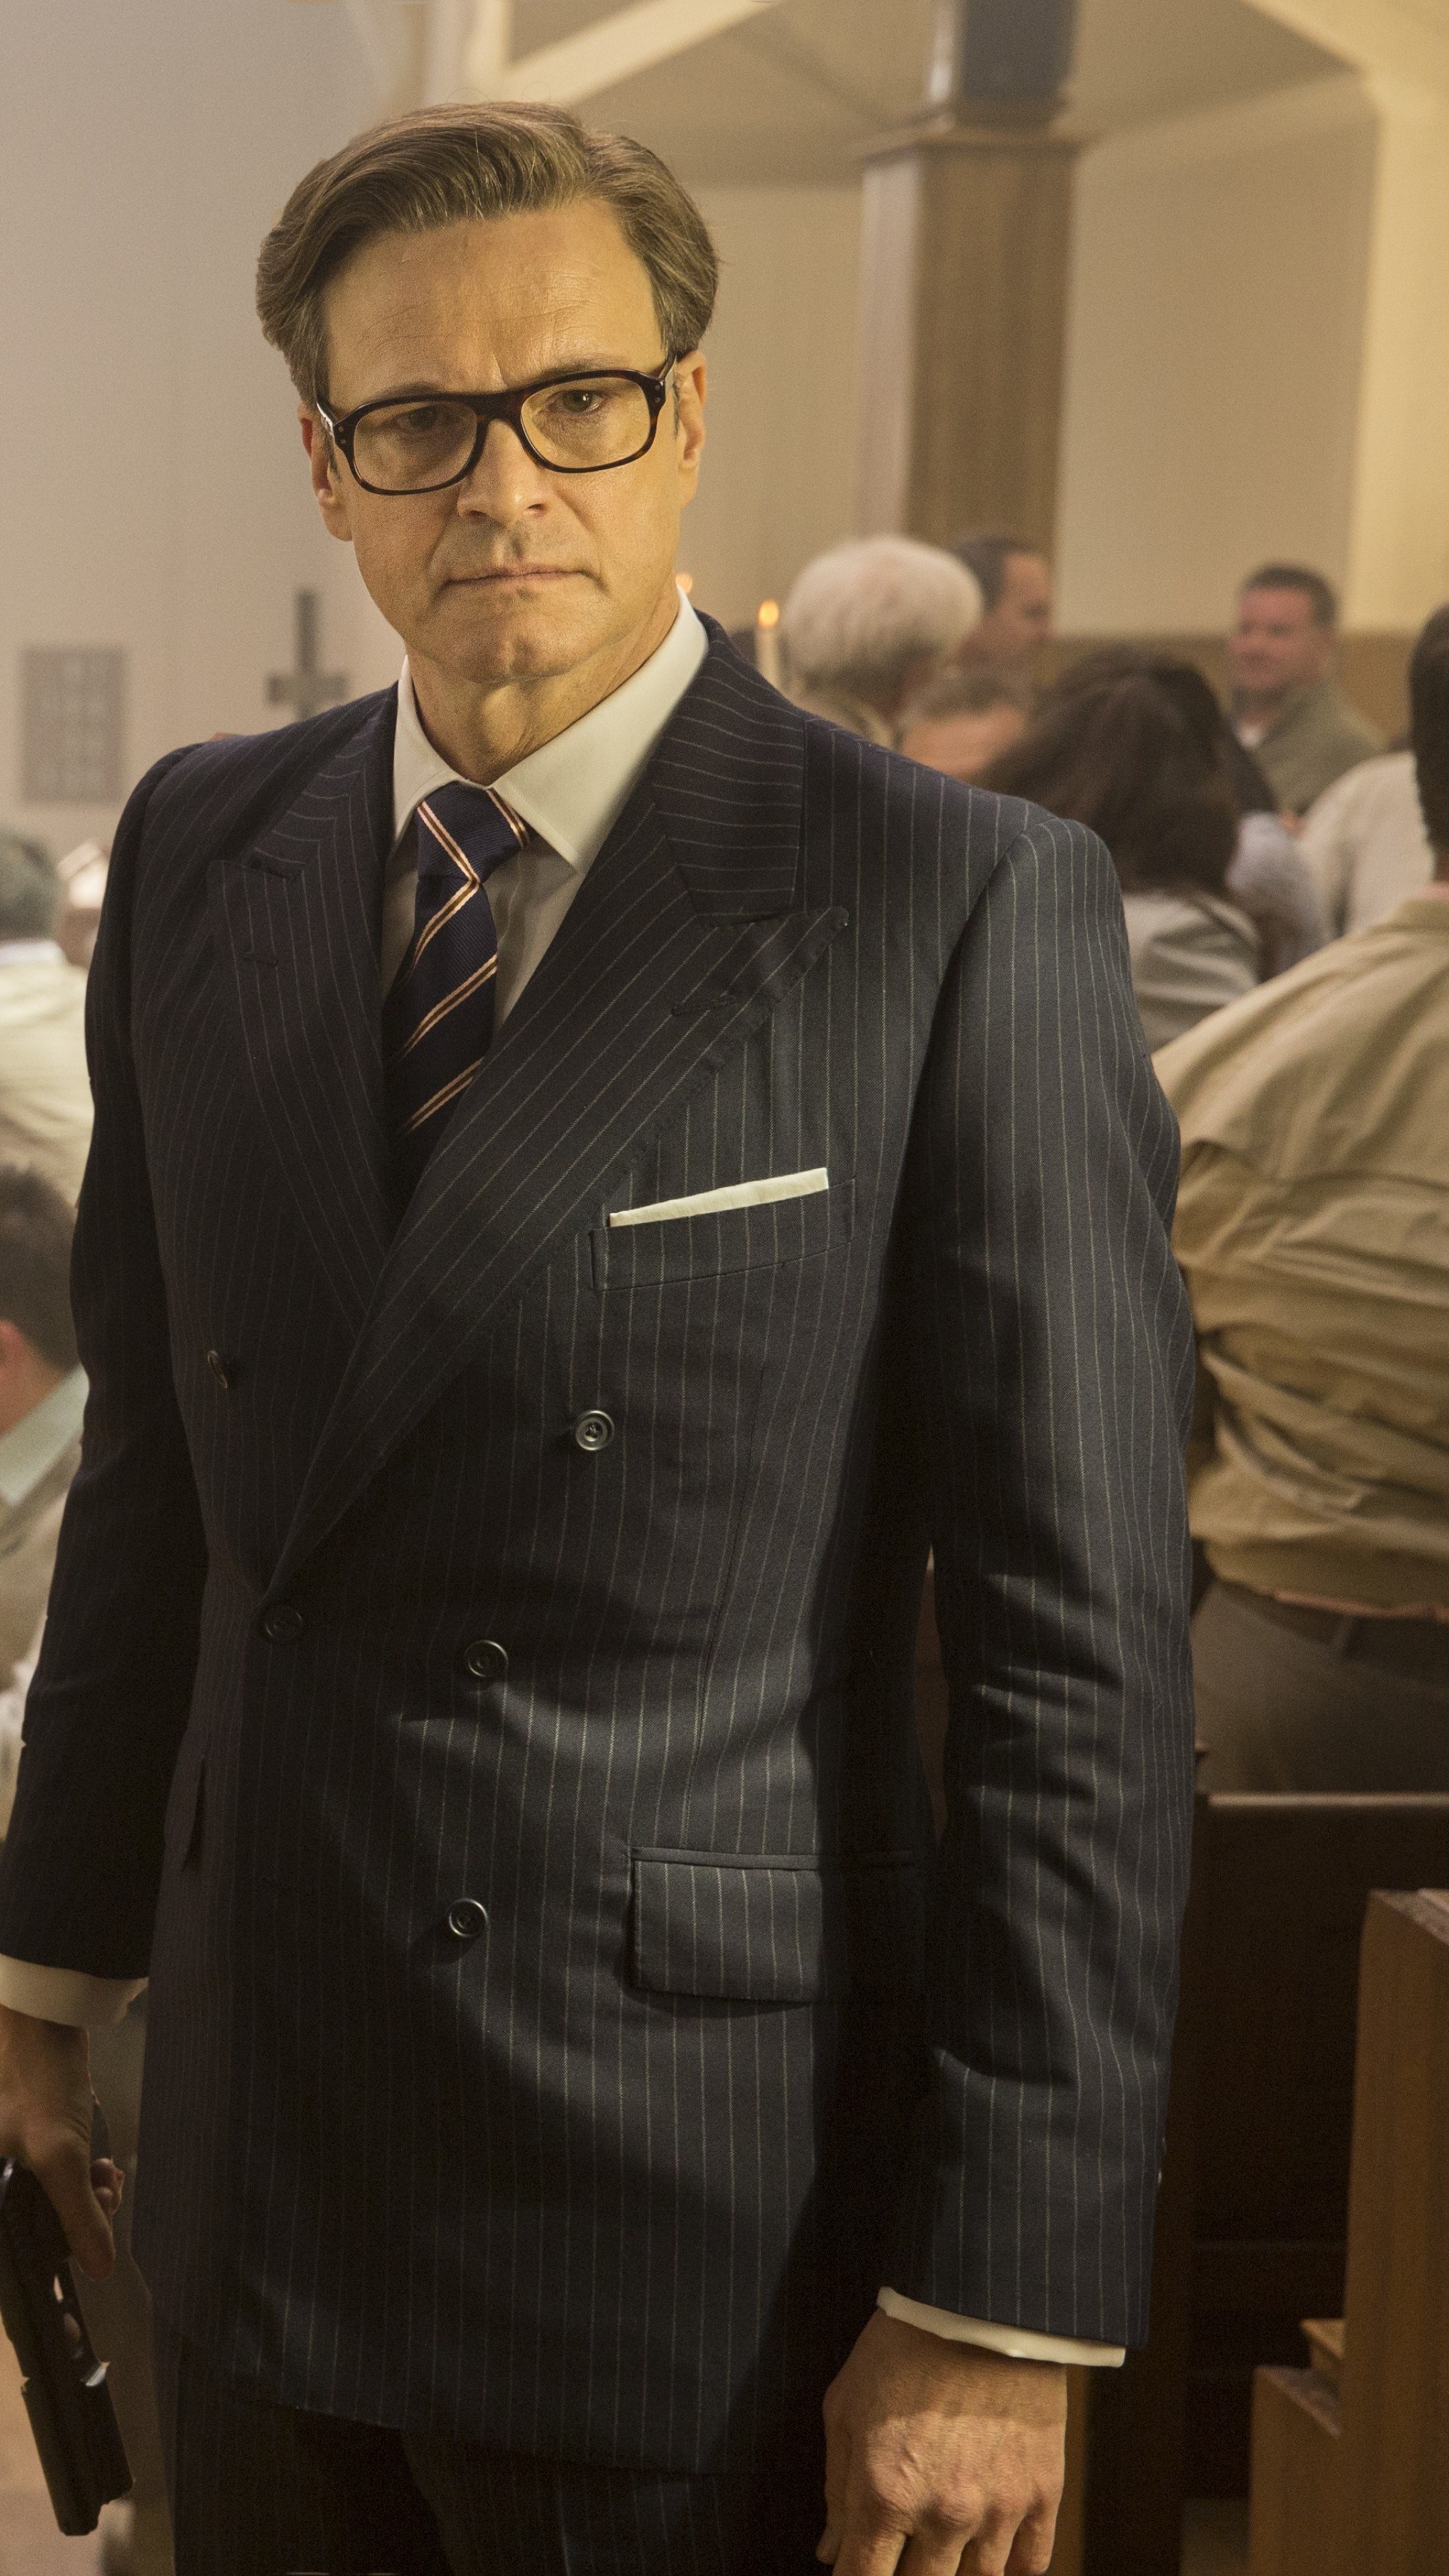 Colin Firth in Golden Circle, 5K movie wallpaper, Action-packed film, Kingman sequel, 2160x3840 4K Phone